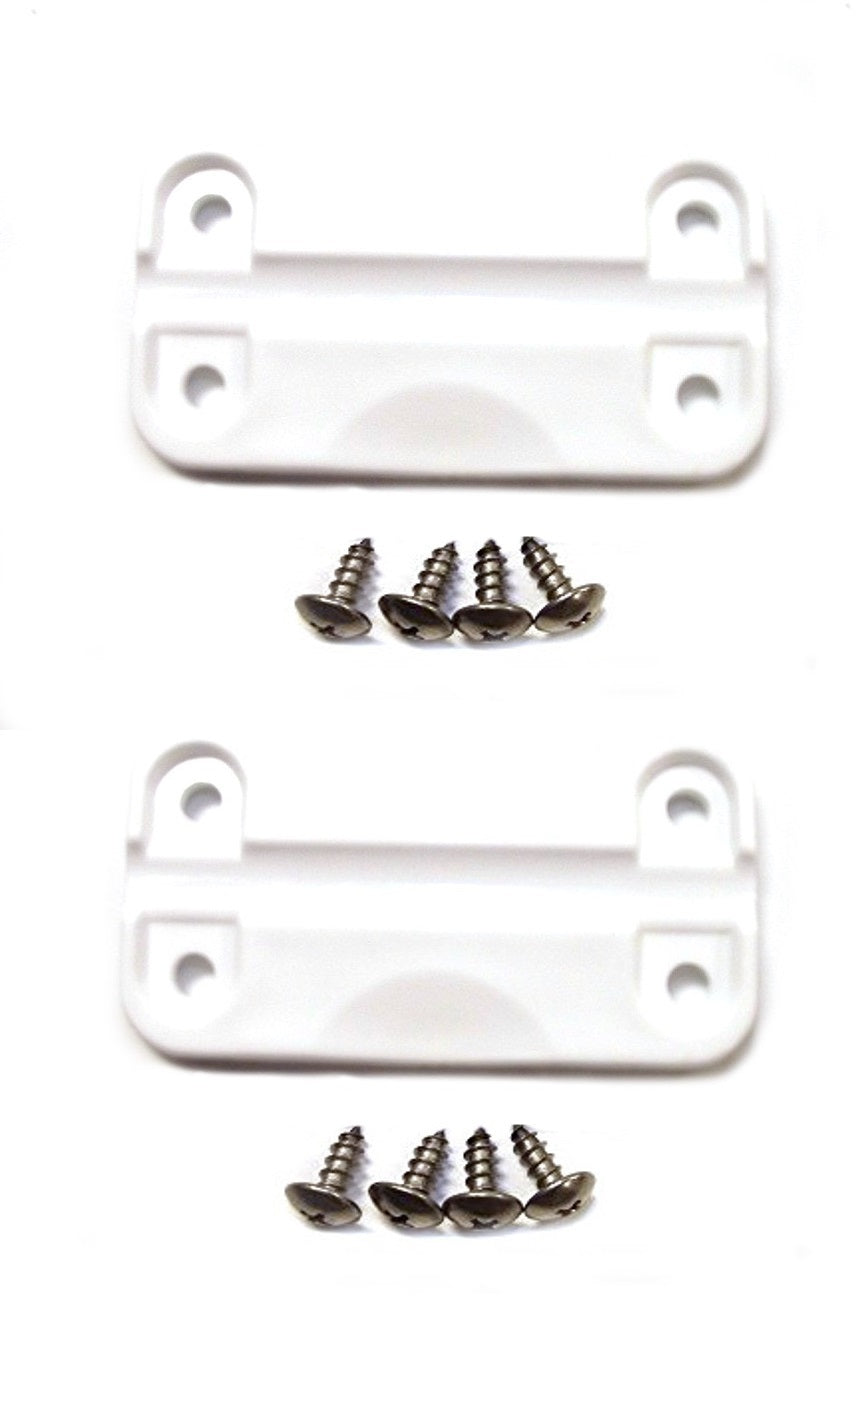 Aftermarket Igloo Cooler Replacement (1) Latch, (2) Hinges & Screw Kit (Part#24013 & 24012)